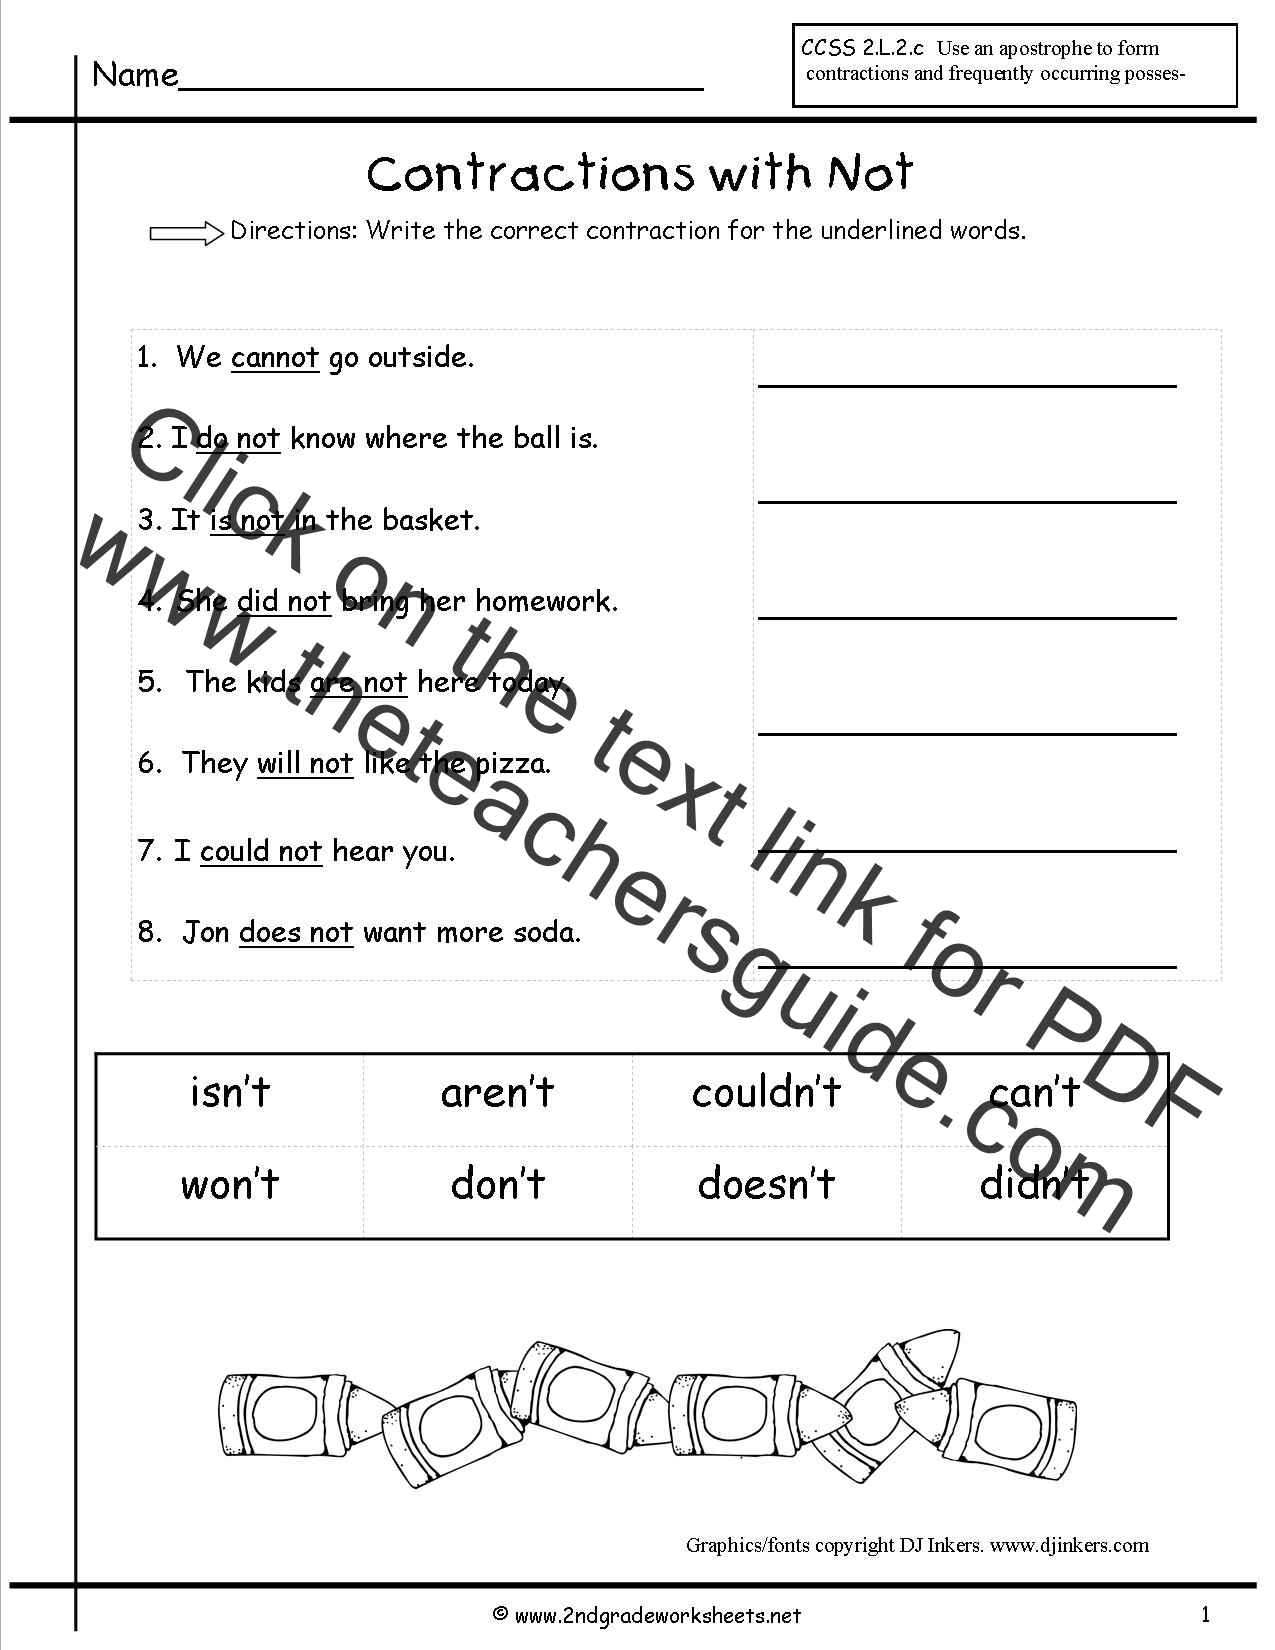 Free Contractions Worksheets and Printouts Throughout Contractions Worksheet 3rd Grade